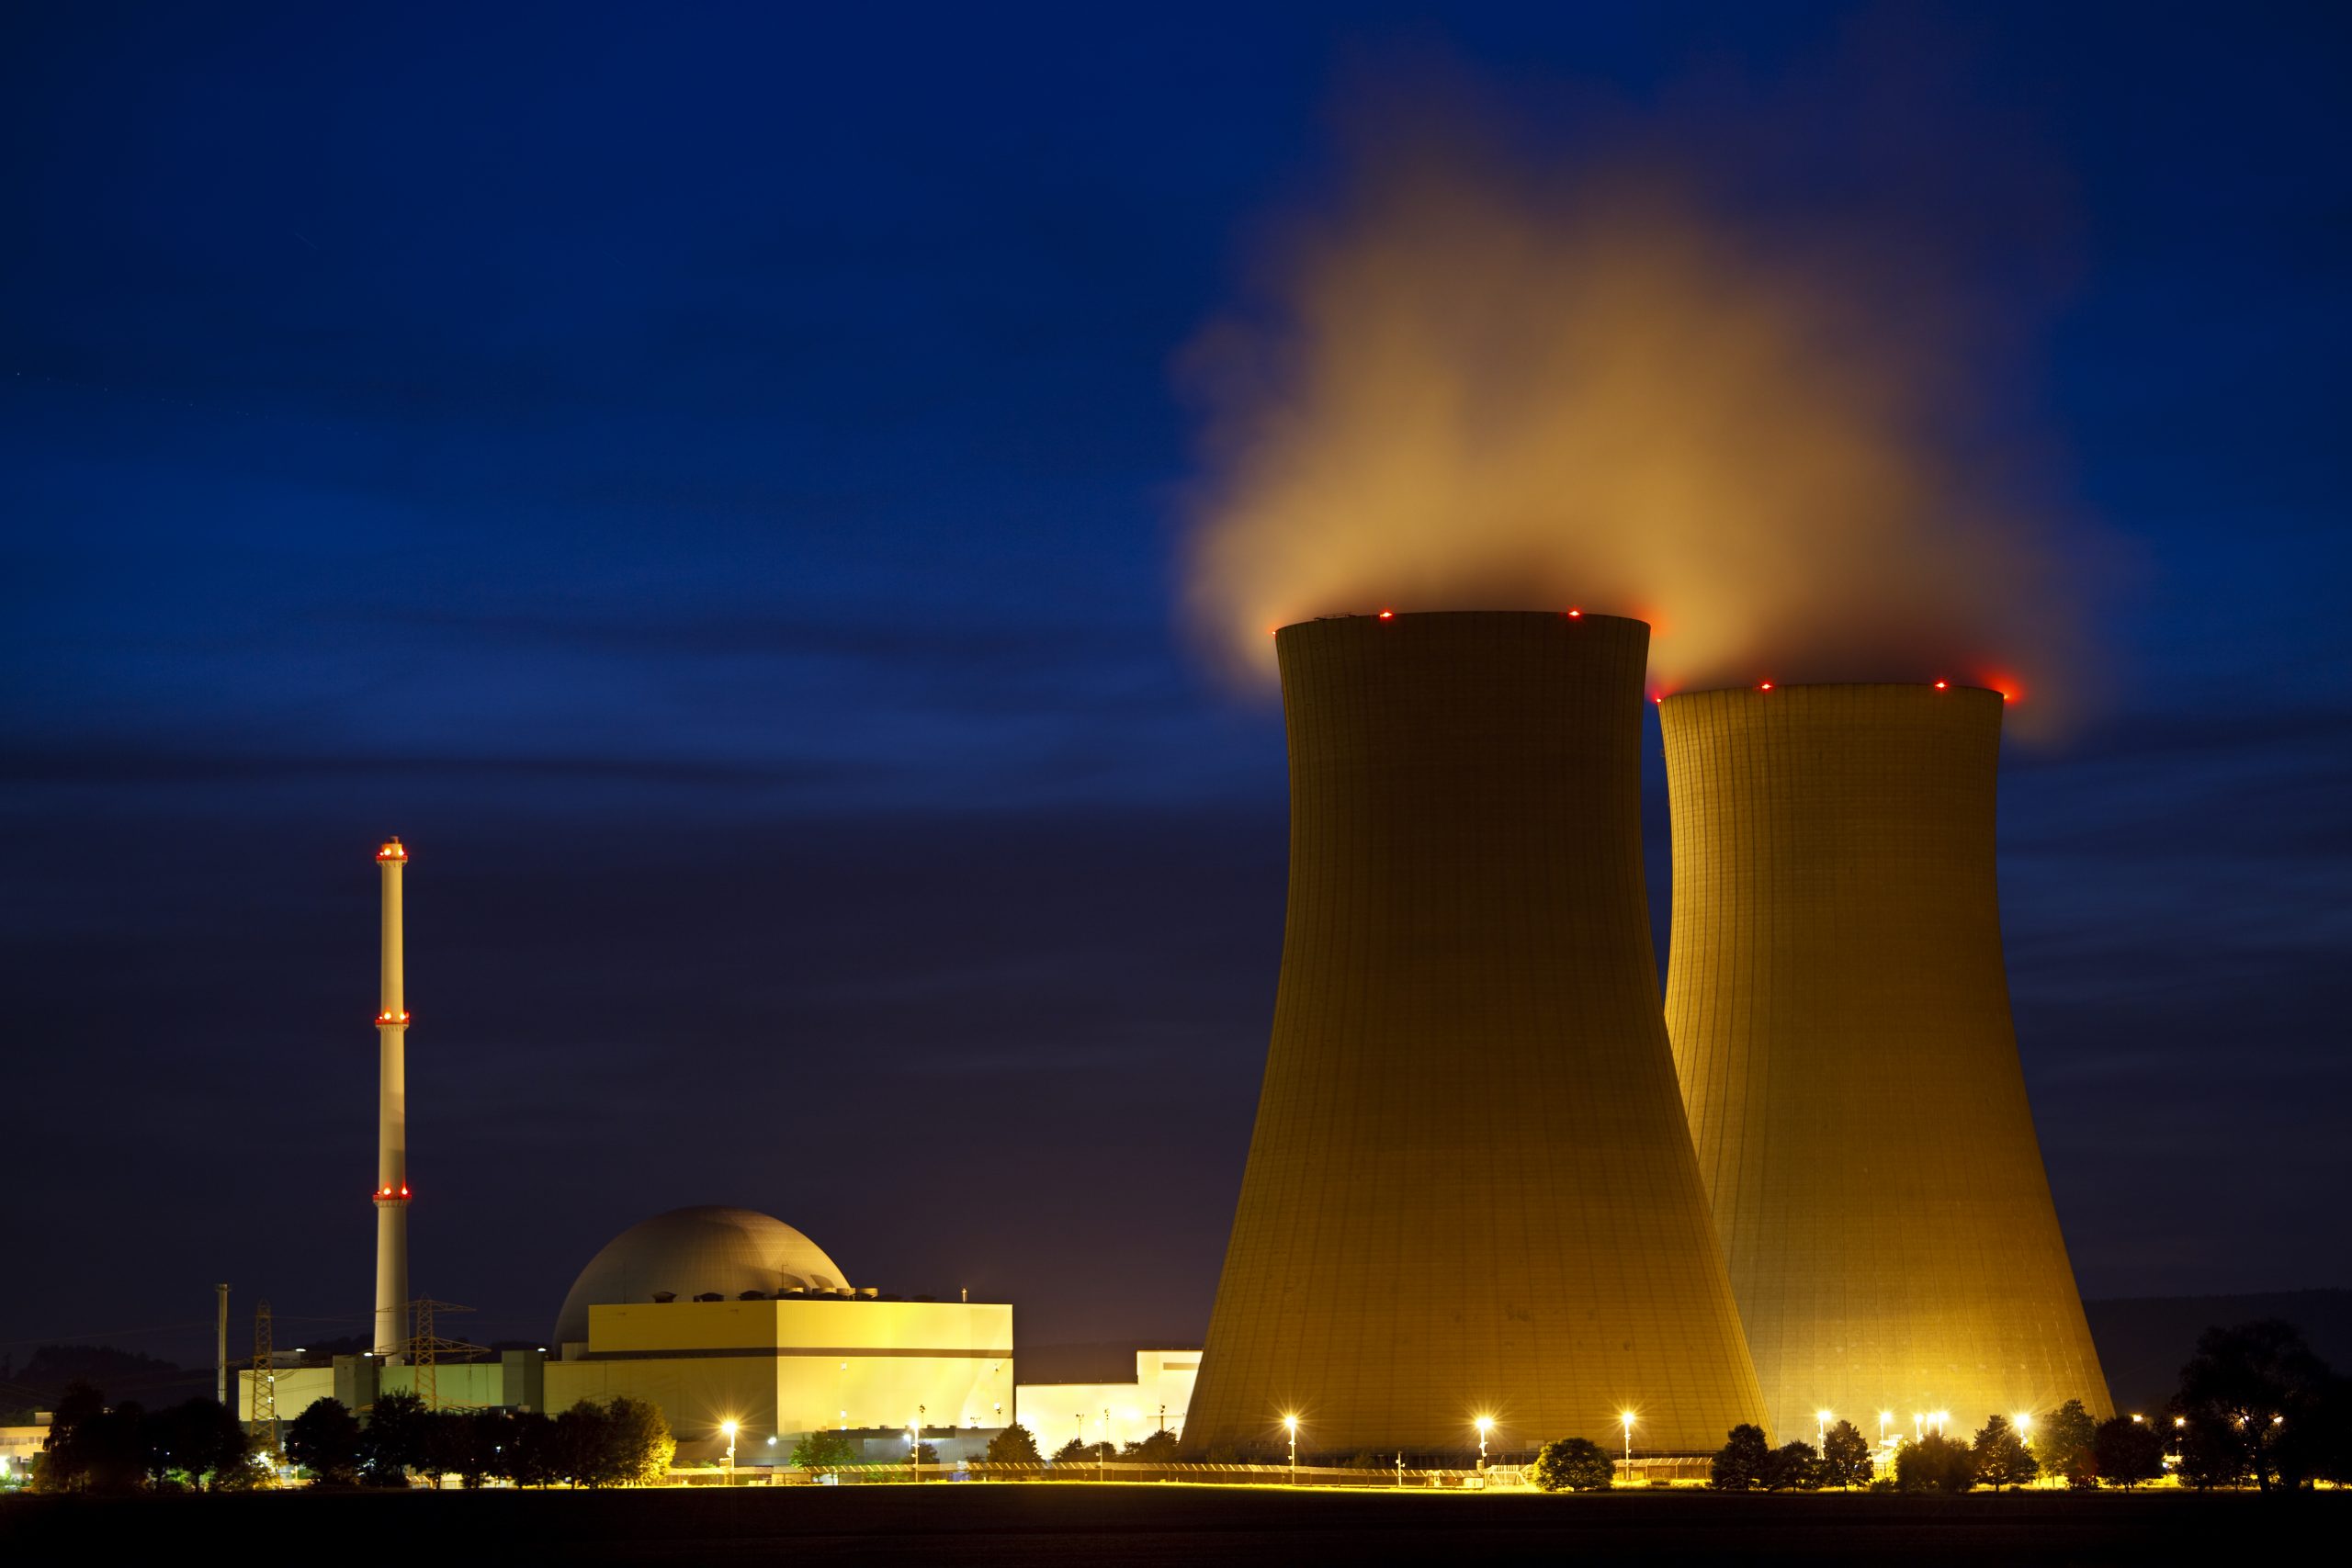 Nuclear Power Station At Night